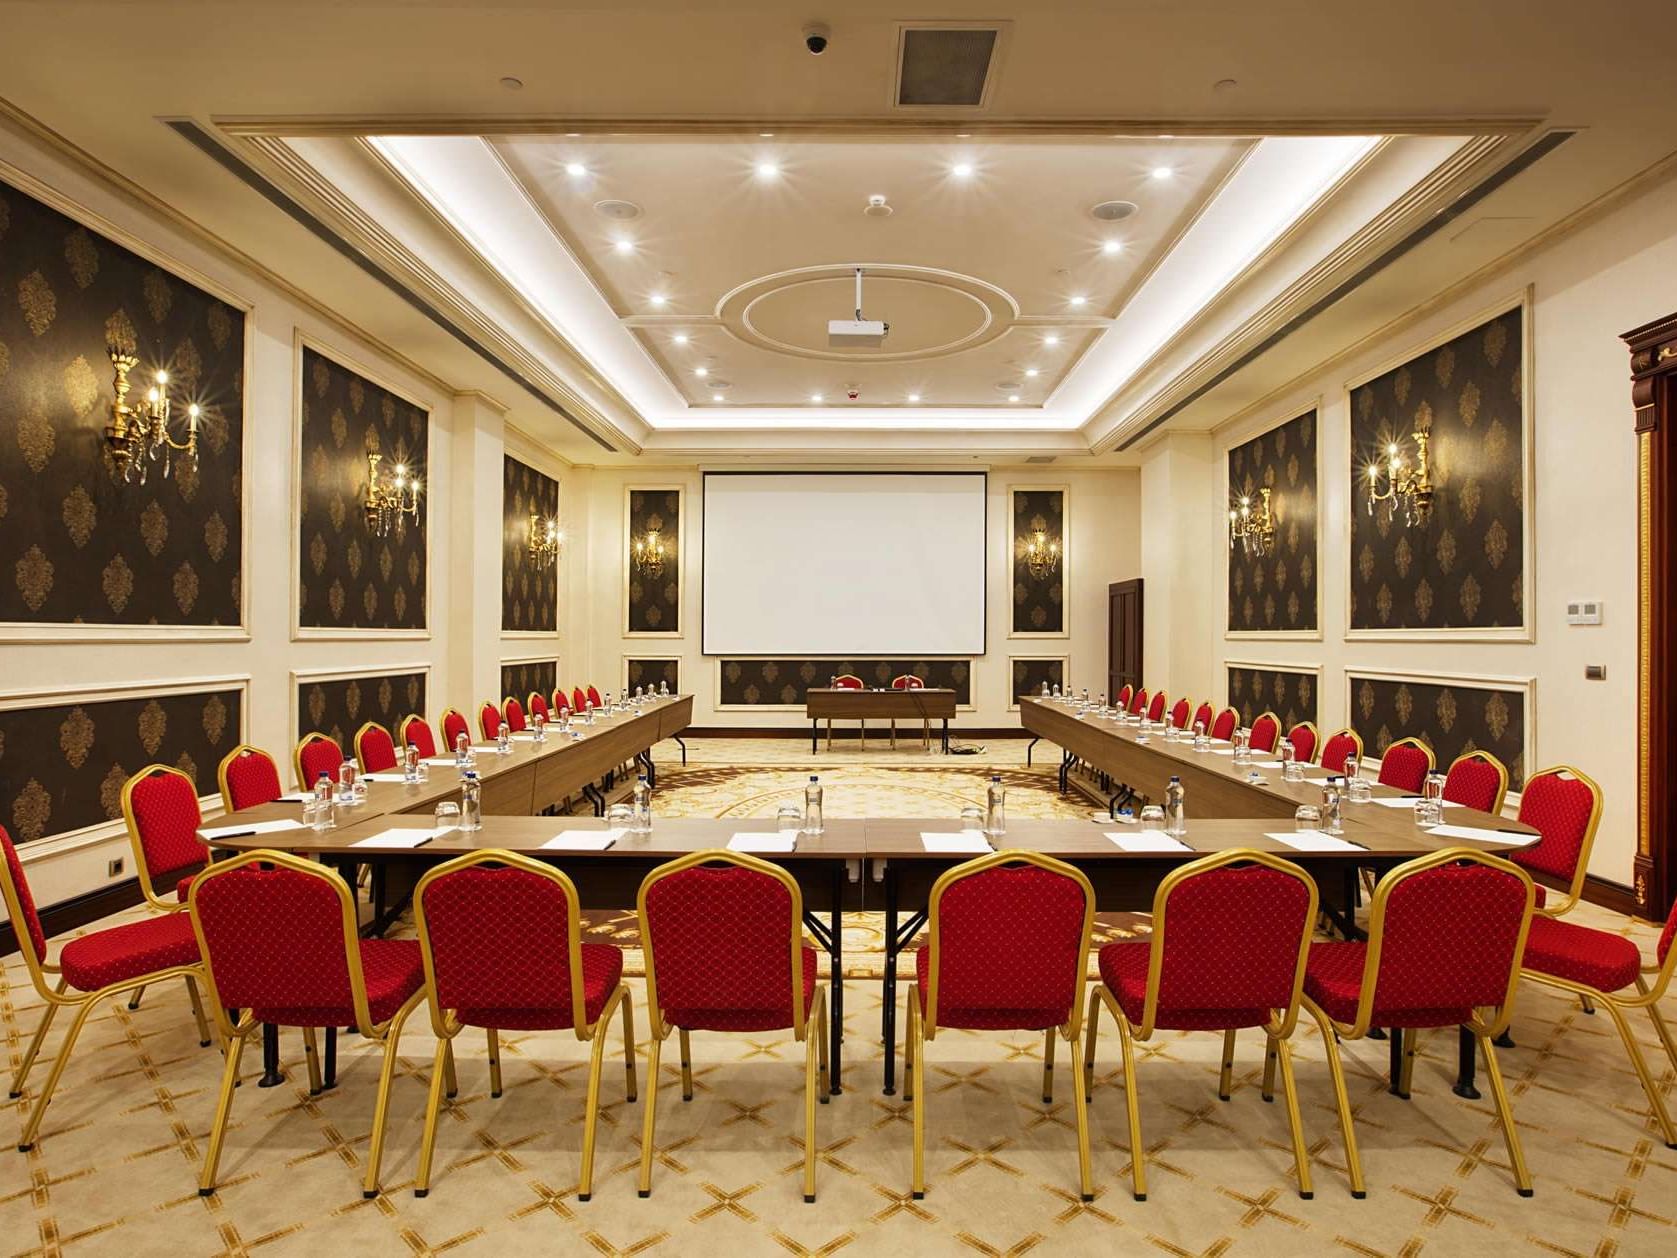 Table arrangement in Fatih meeting room at Ottomans Life Deluxe